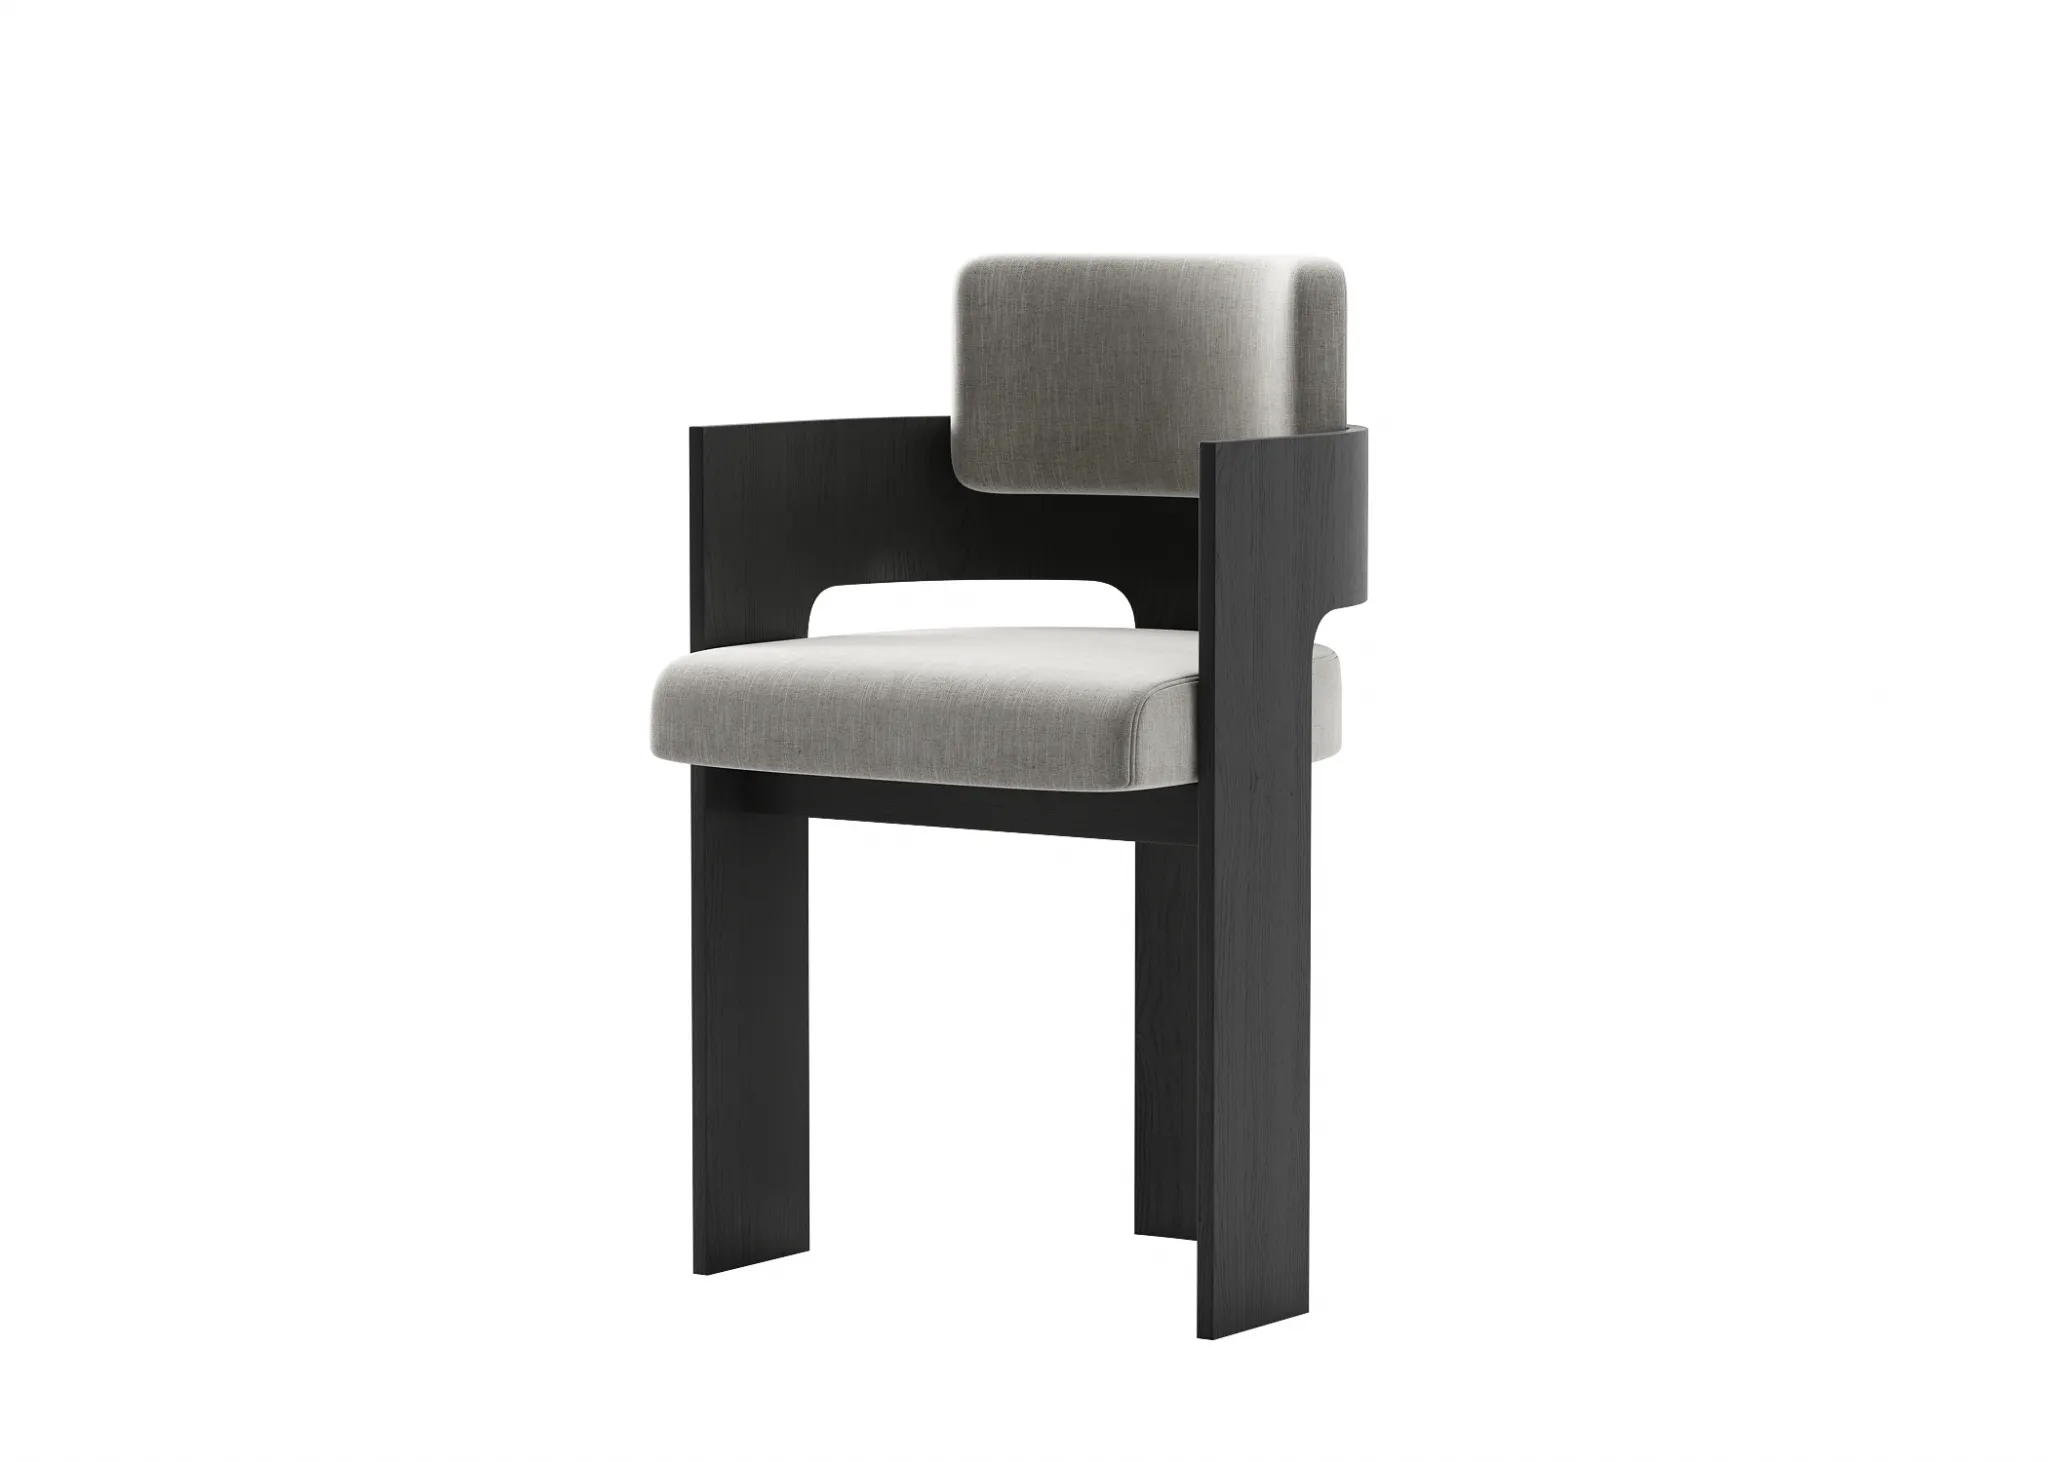 FURNITURE 3D MODELS – CHAIRS – 0452